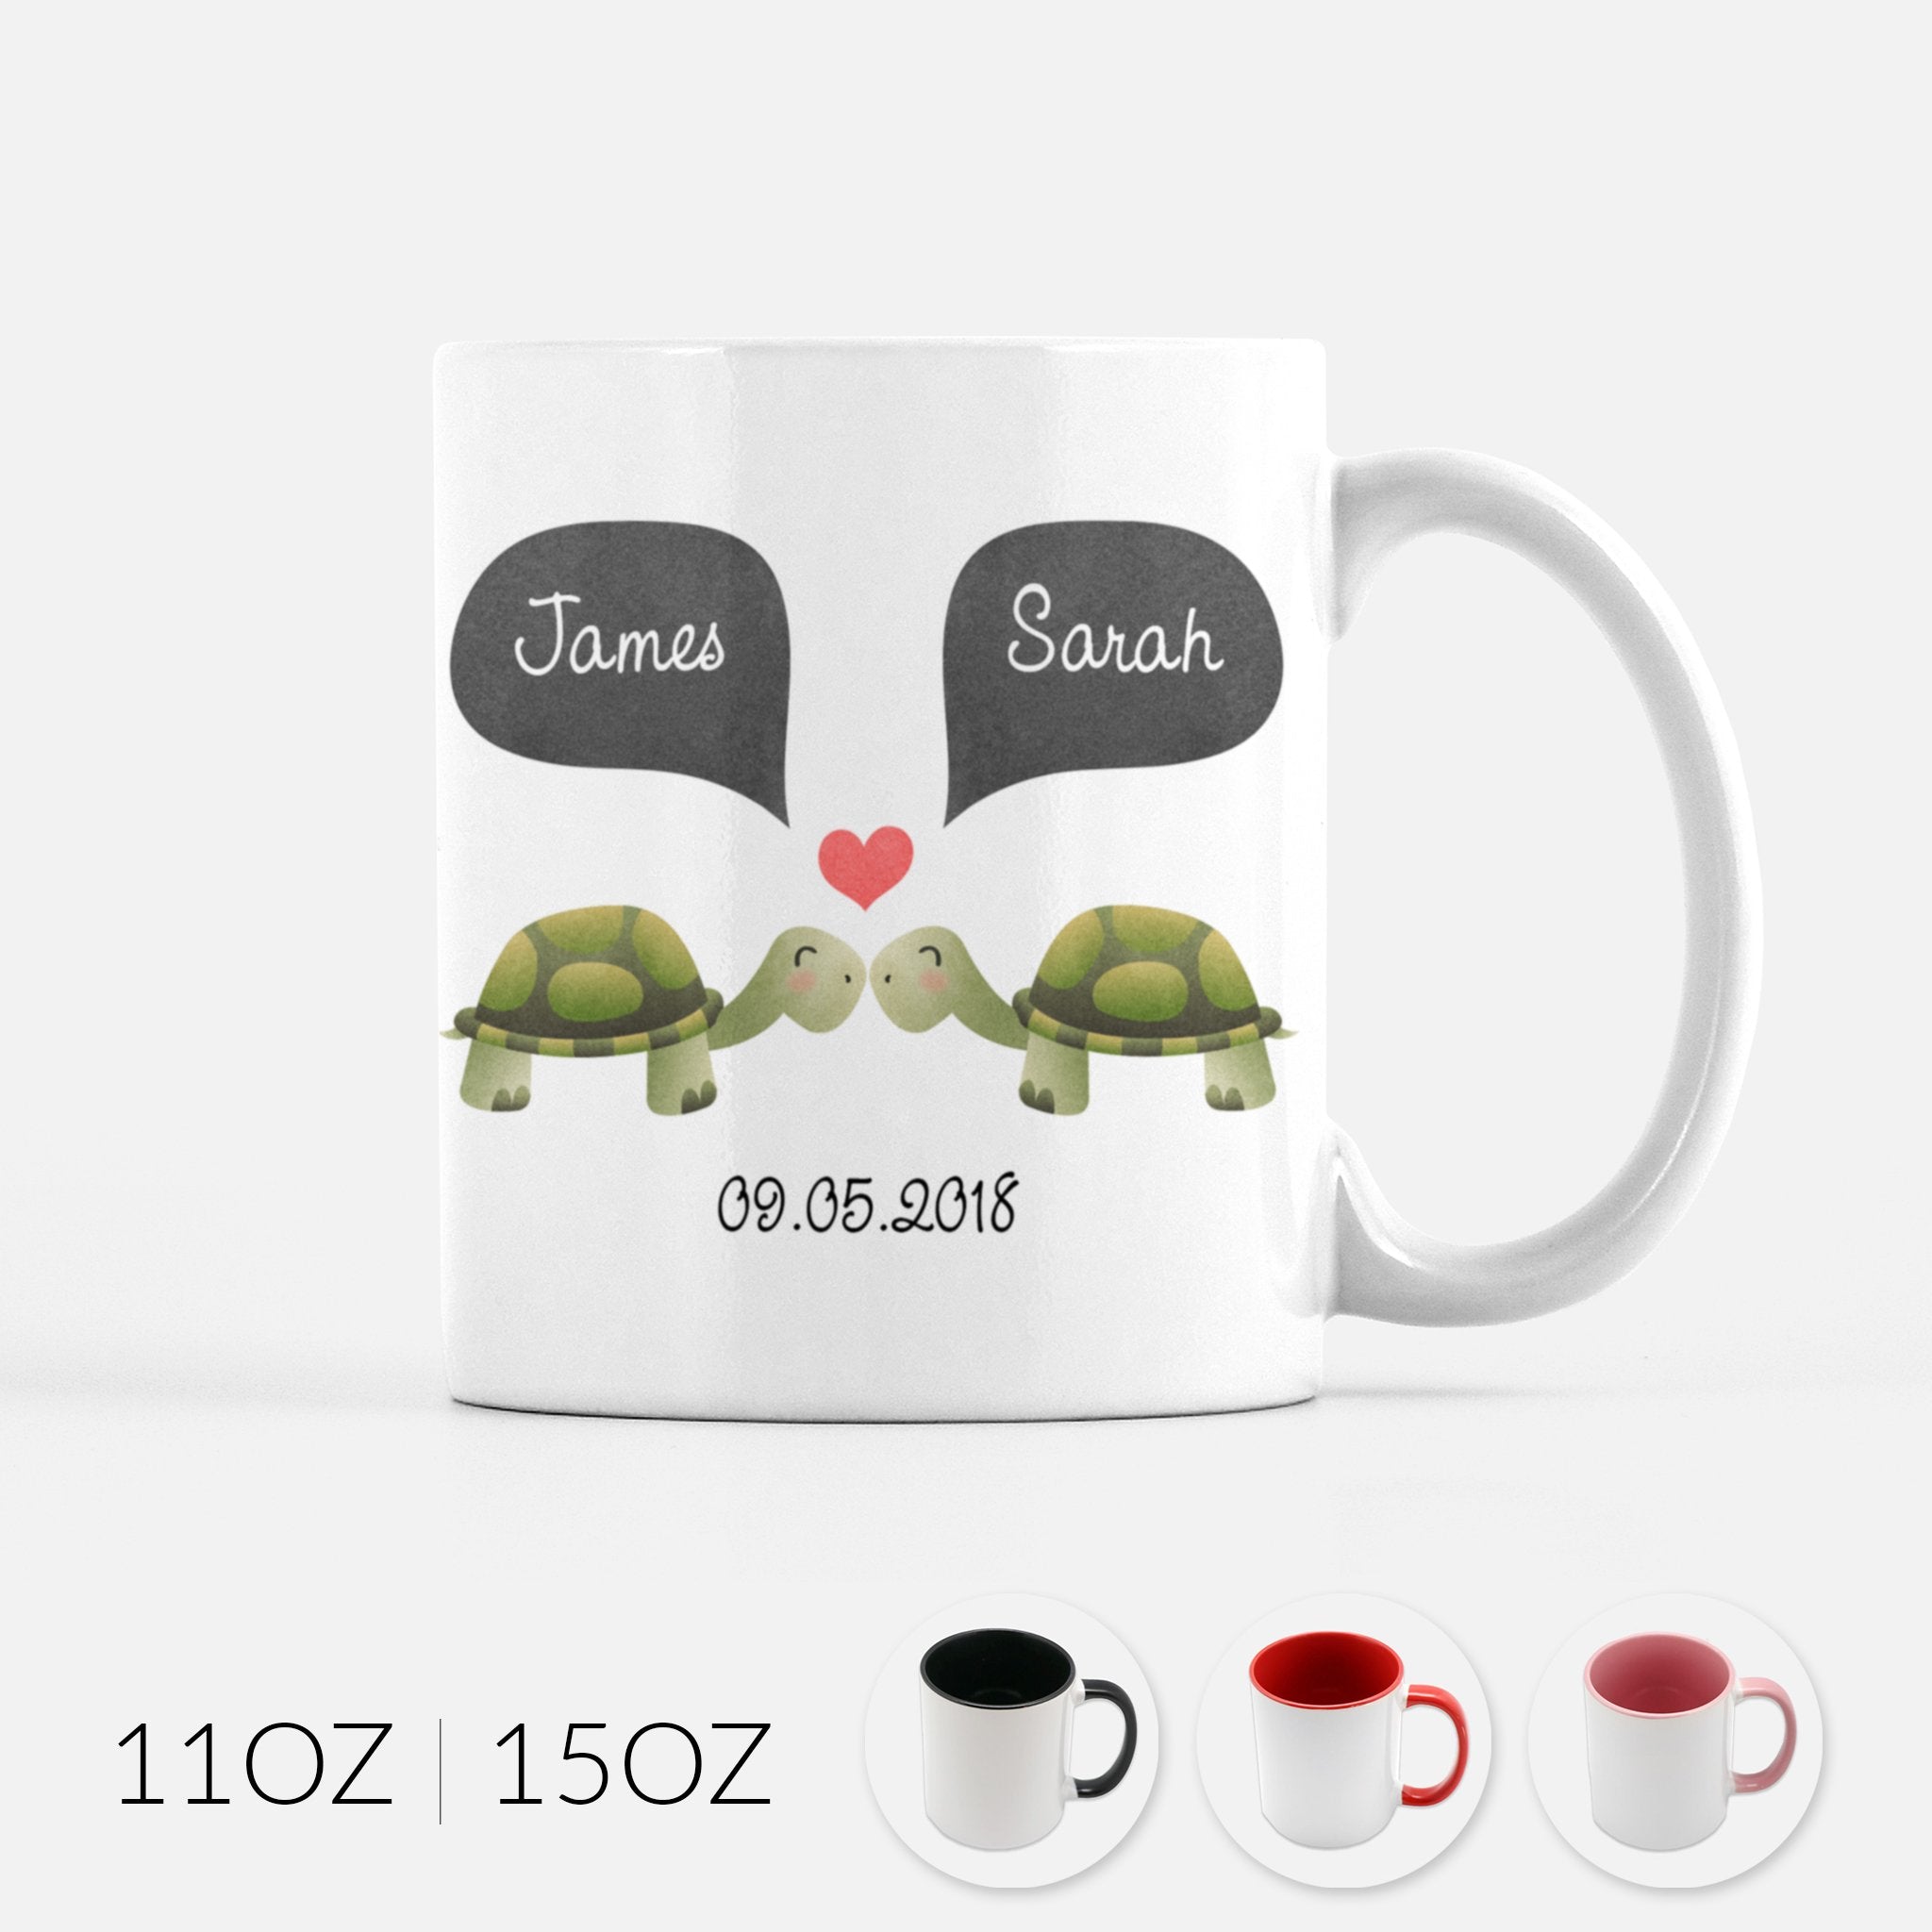 Personalized Turtle Tortoise Couple Ceramic Coffee Mug for Animal Lover - Cute Unique Valentines Day Christmas Engagement Anniversary Wedding Gift for Her Him Women Men Wife Husband Girlfriend Boyfriend - By Happy Cat Prints